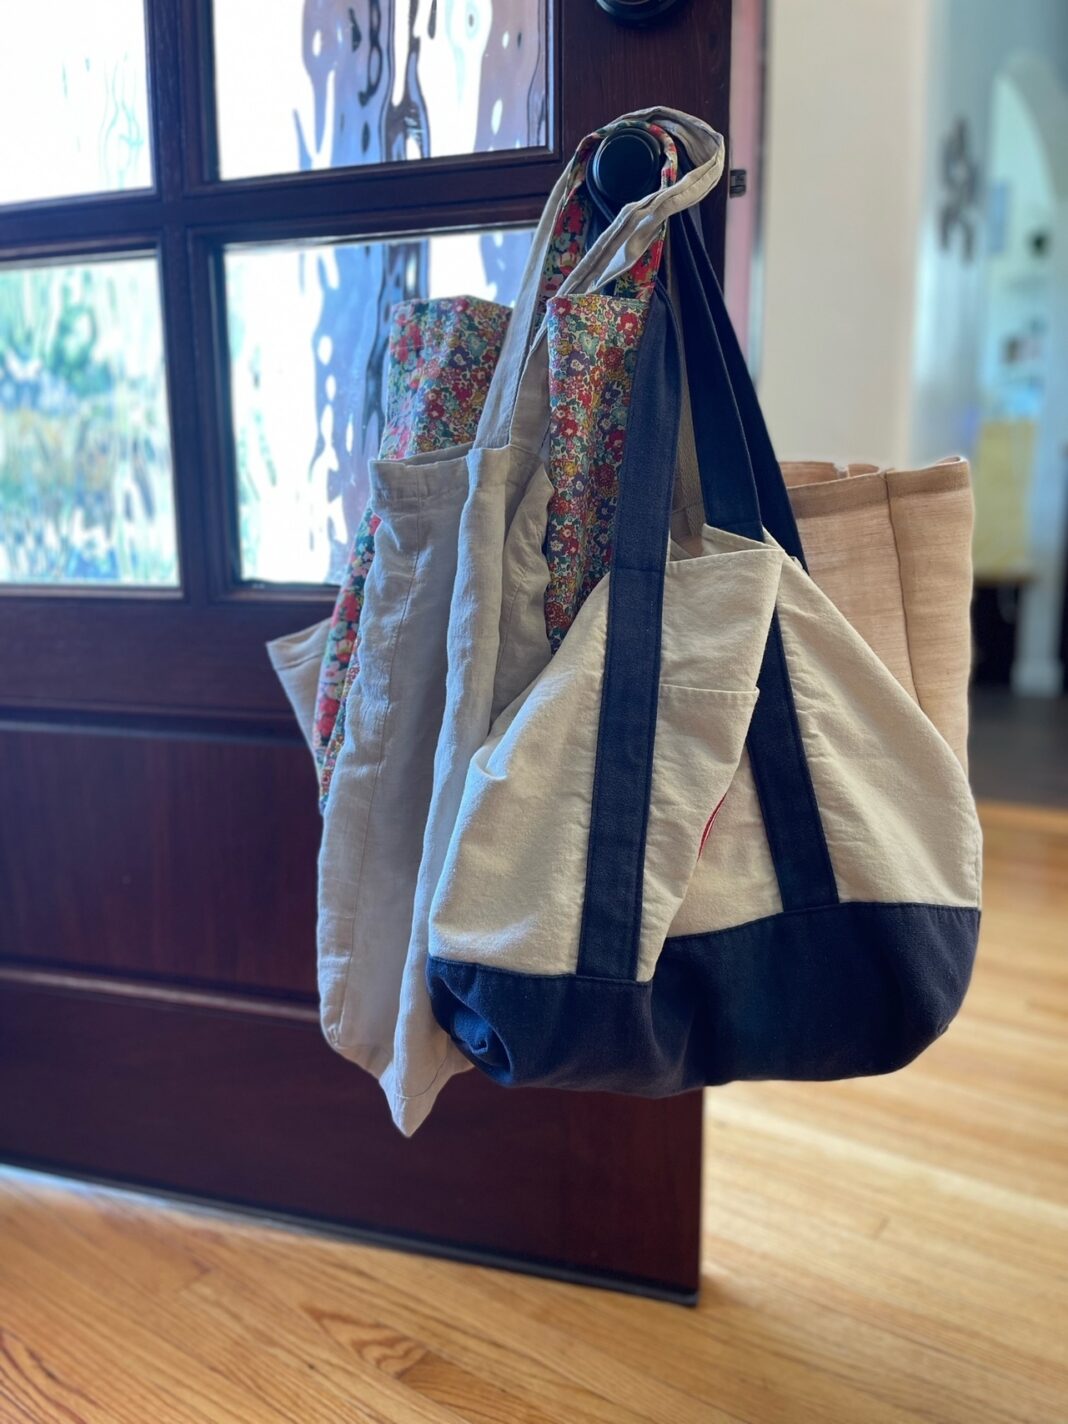 reusable cloth bags hanging on door know